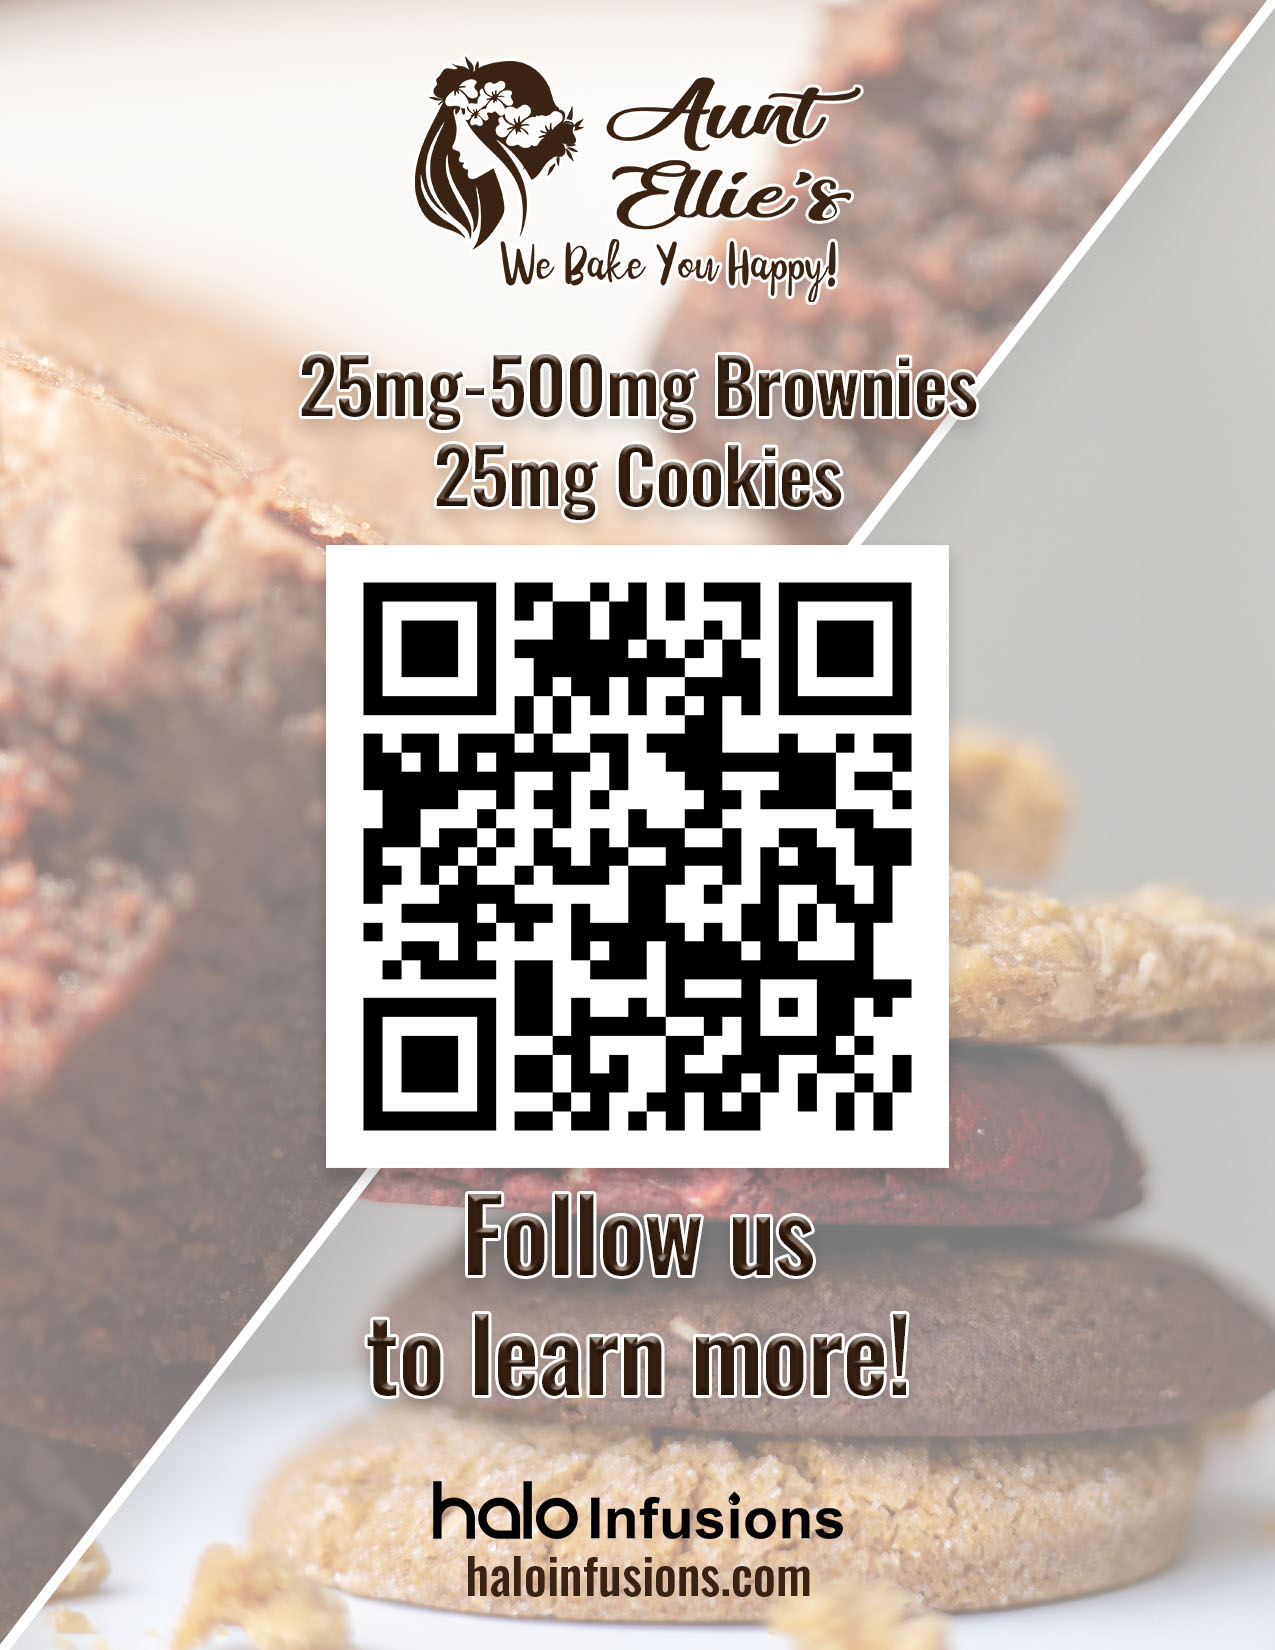 Aunt Ellie's we bake you happy, 25-500mg brownie, 25mg cookies, Halo Infusions